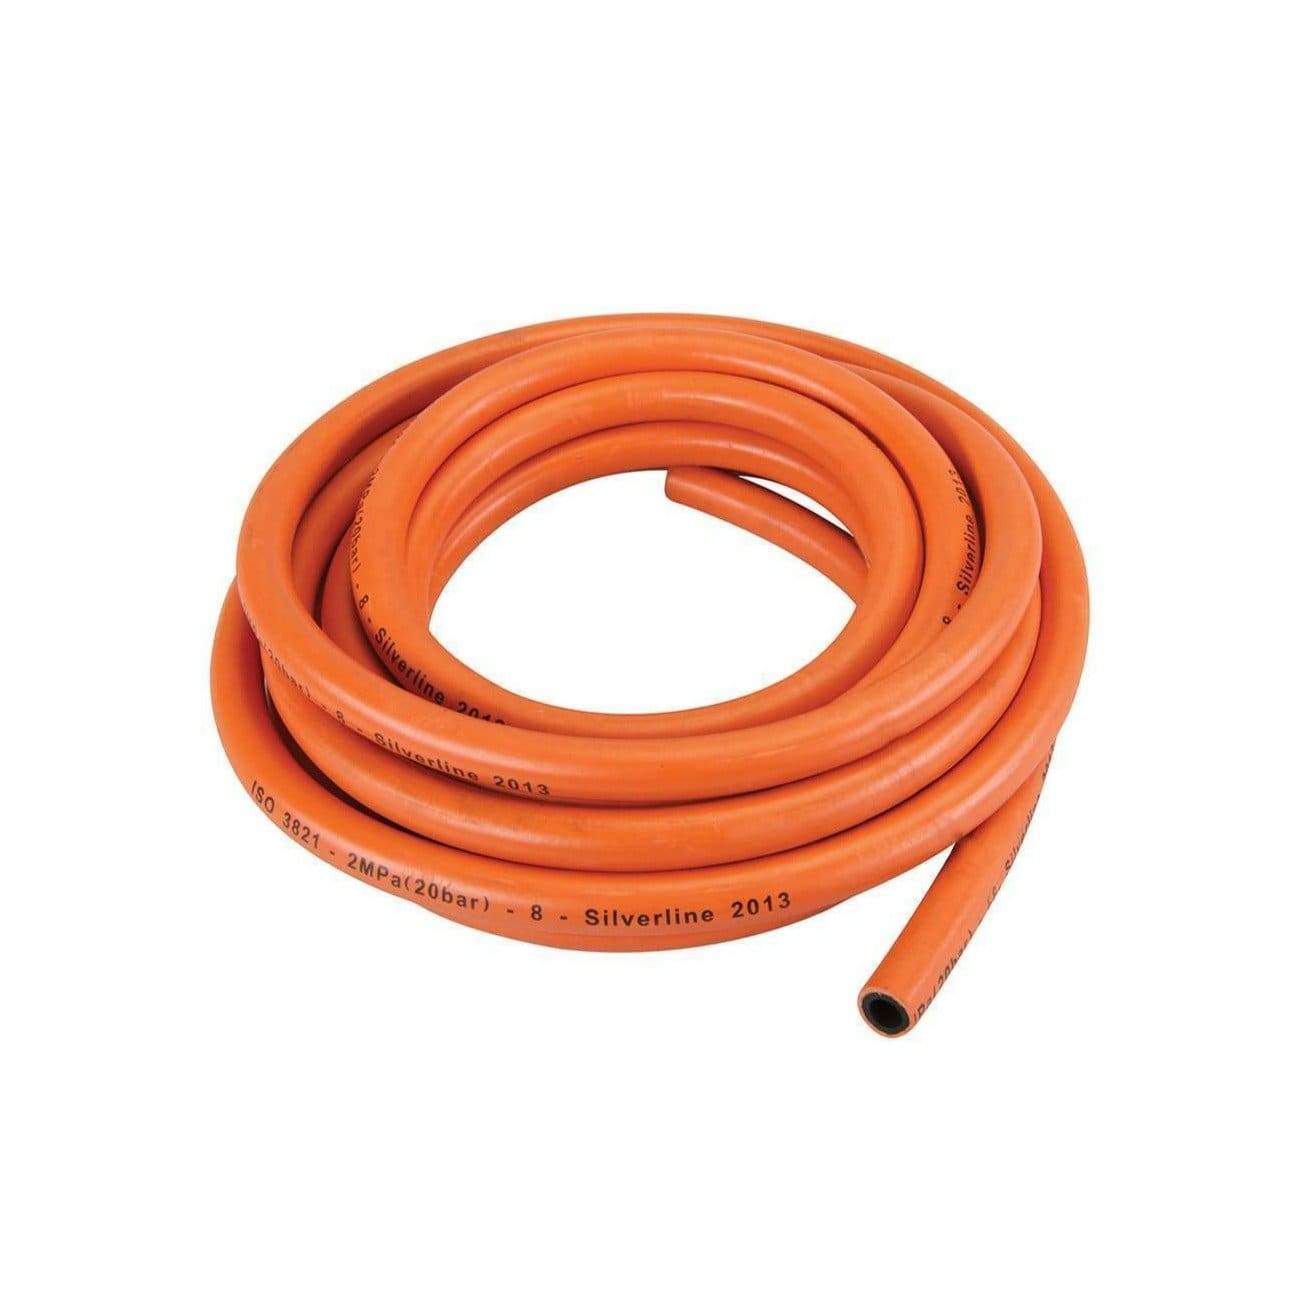 ¾” Rubber Water Hose 50m | Supply Master | Accra, Ghana Building Material Building Steel Engineering Hardware tool